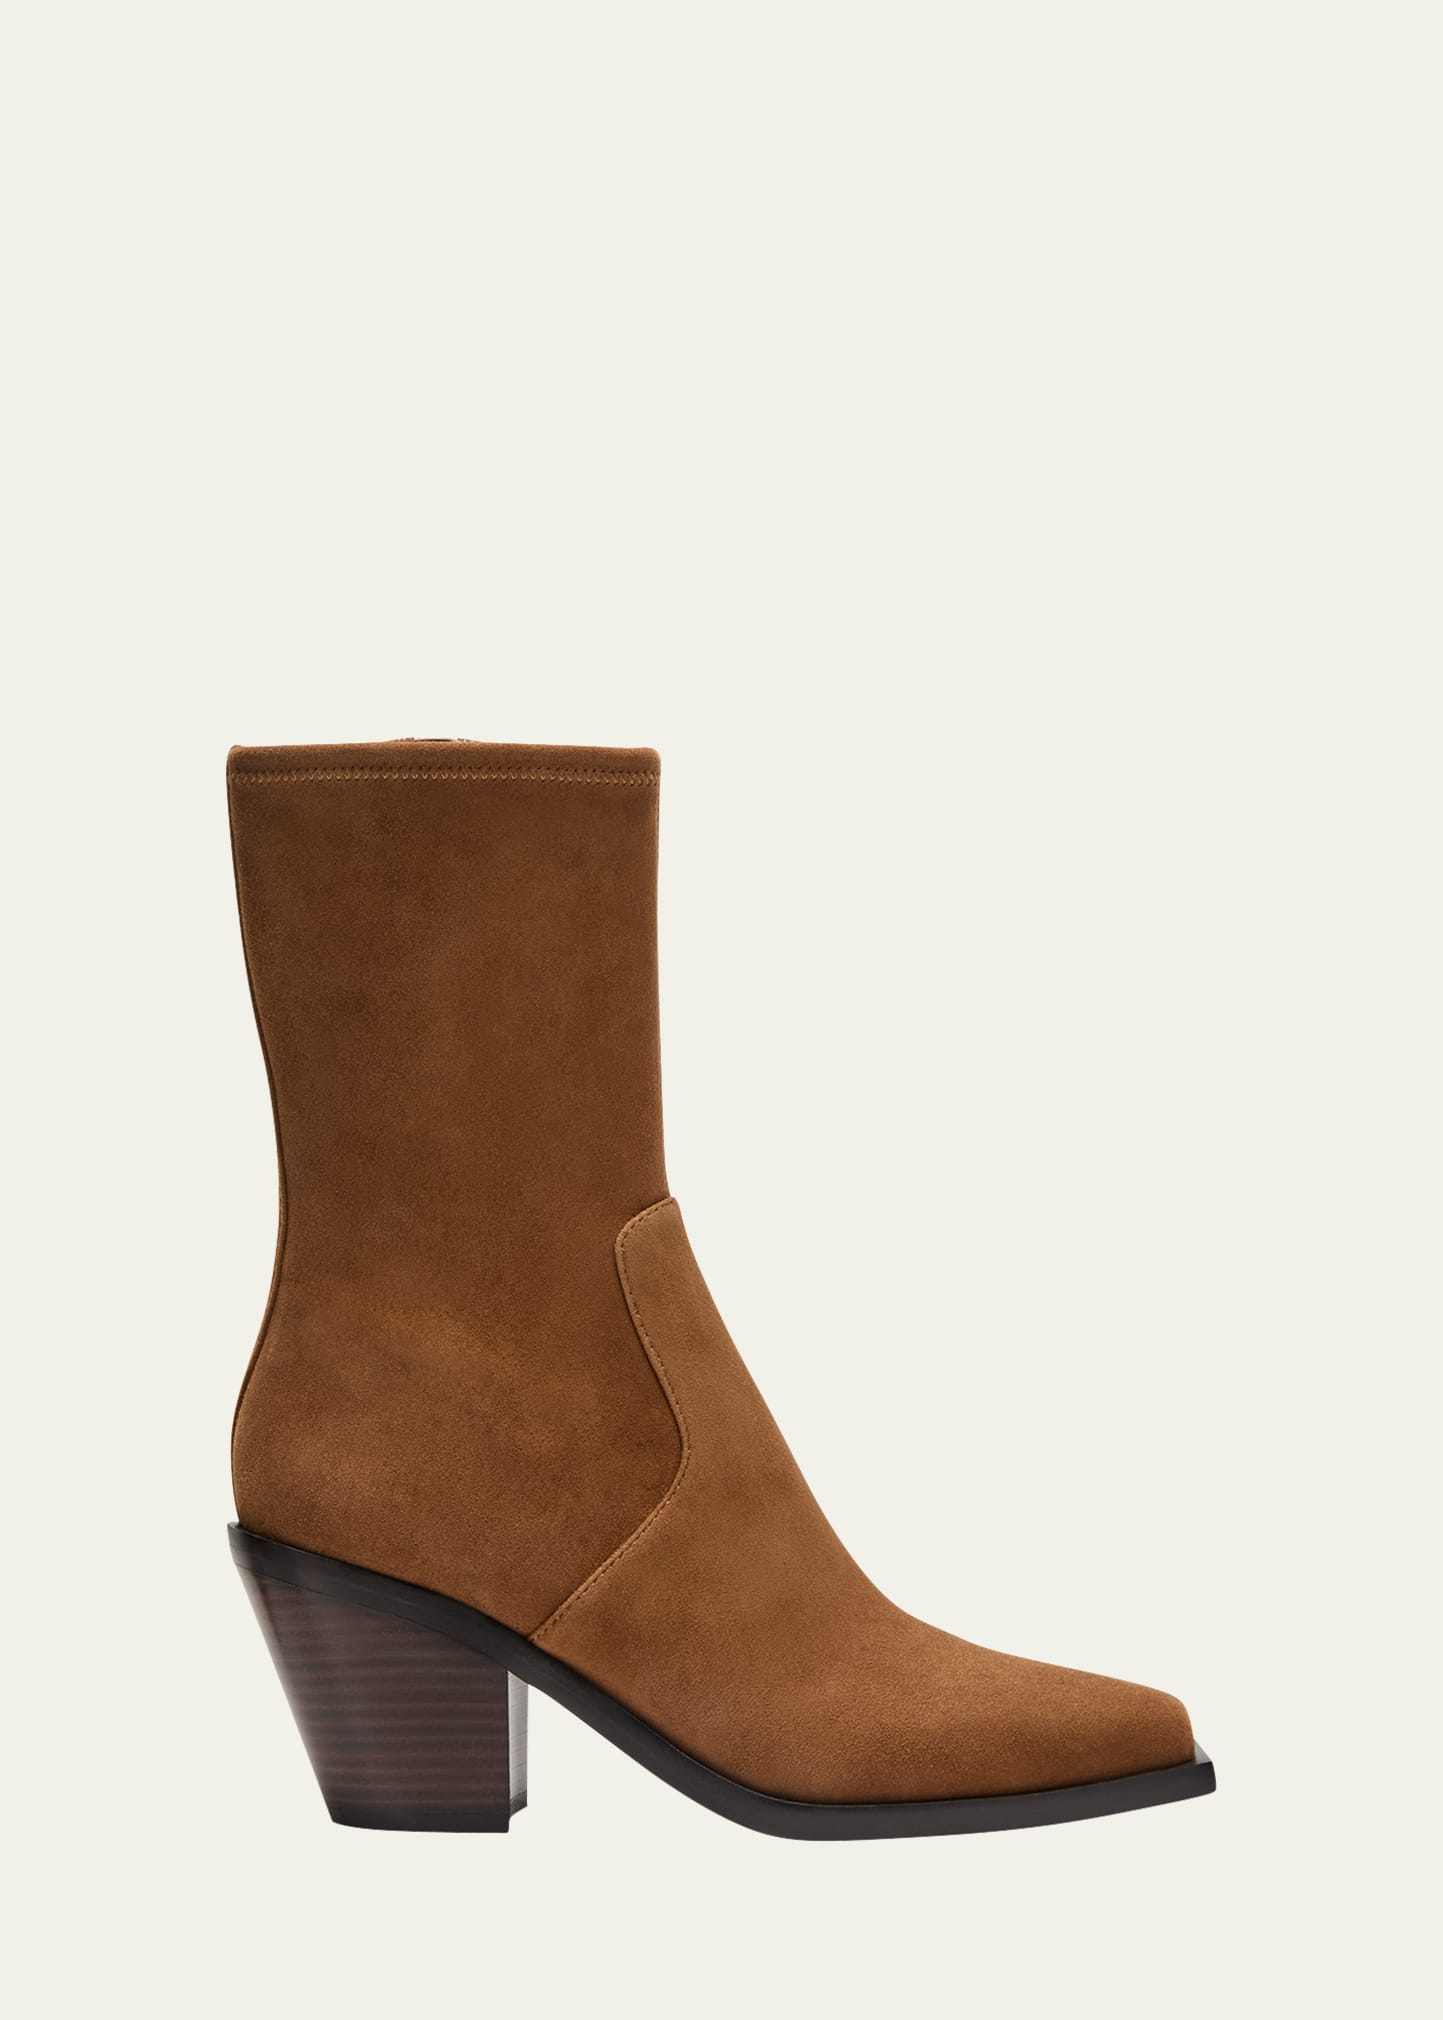 Reese Suede Ankle Booties